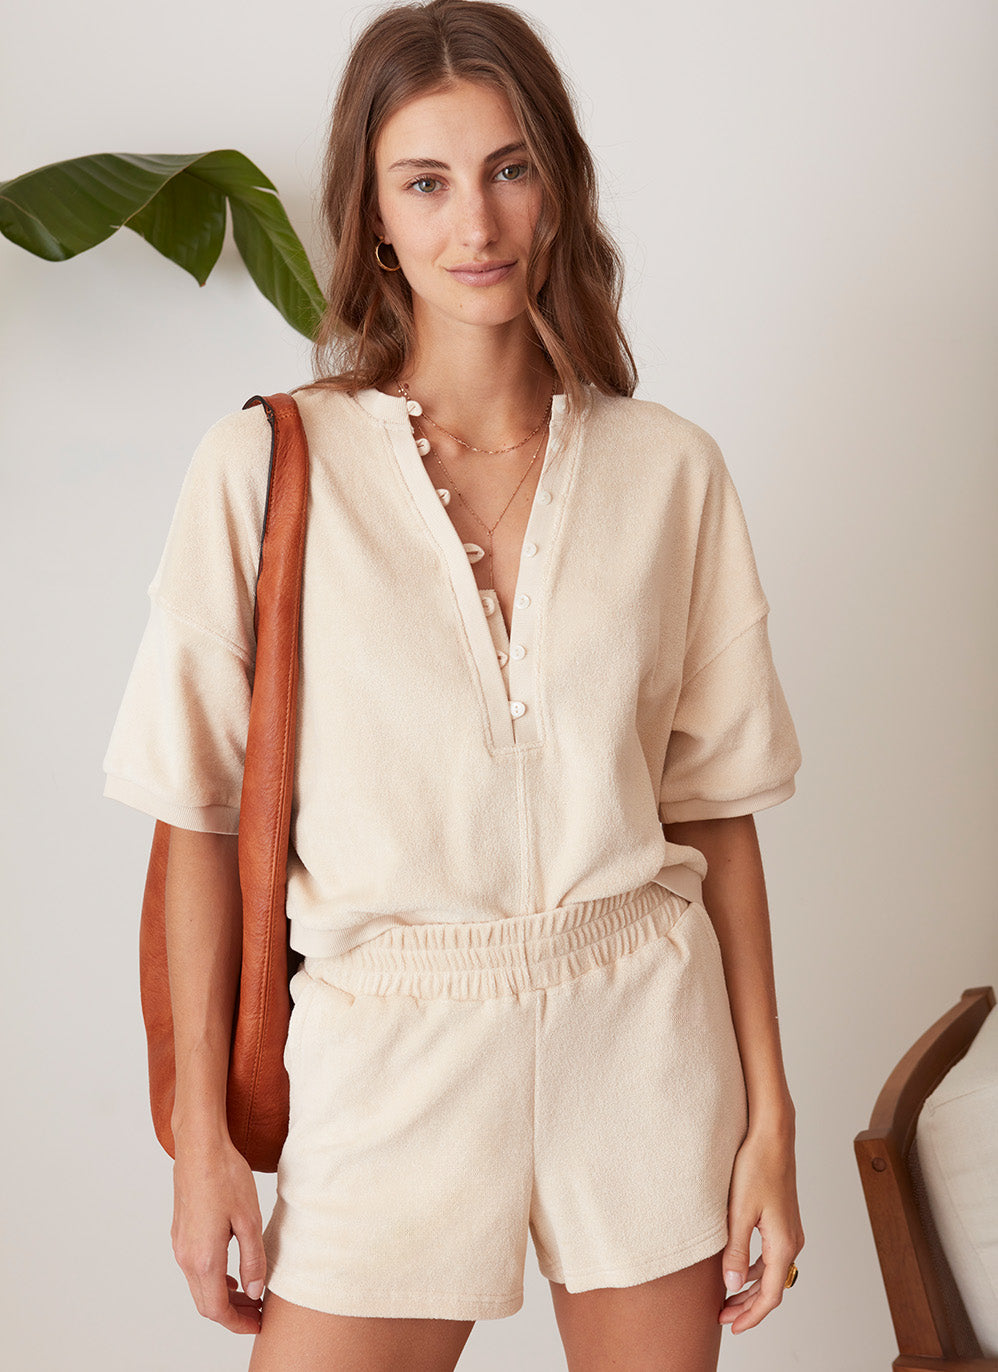 terry fabric button down tee matching set for summer in beige